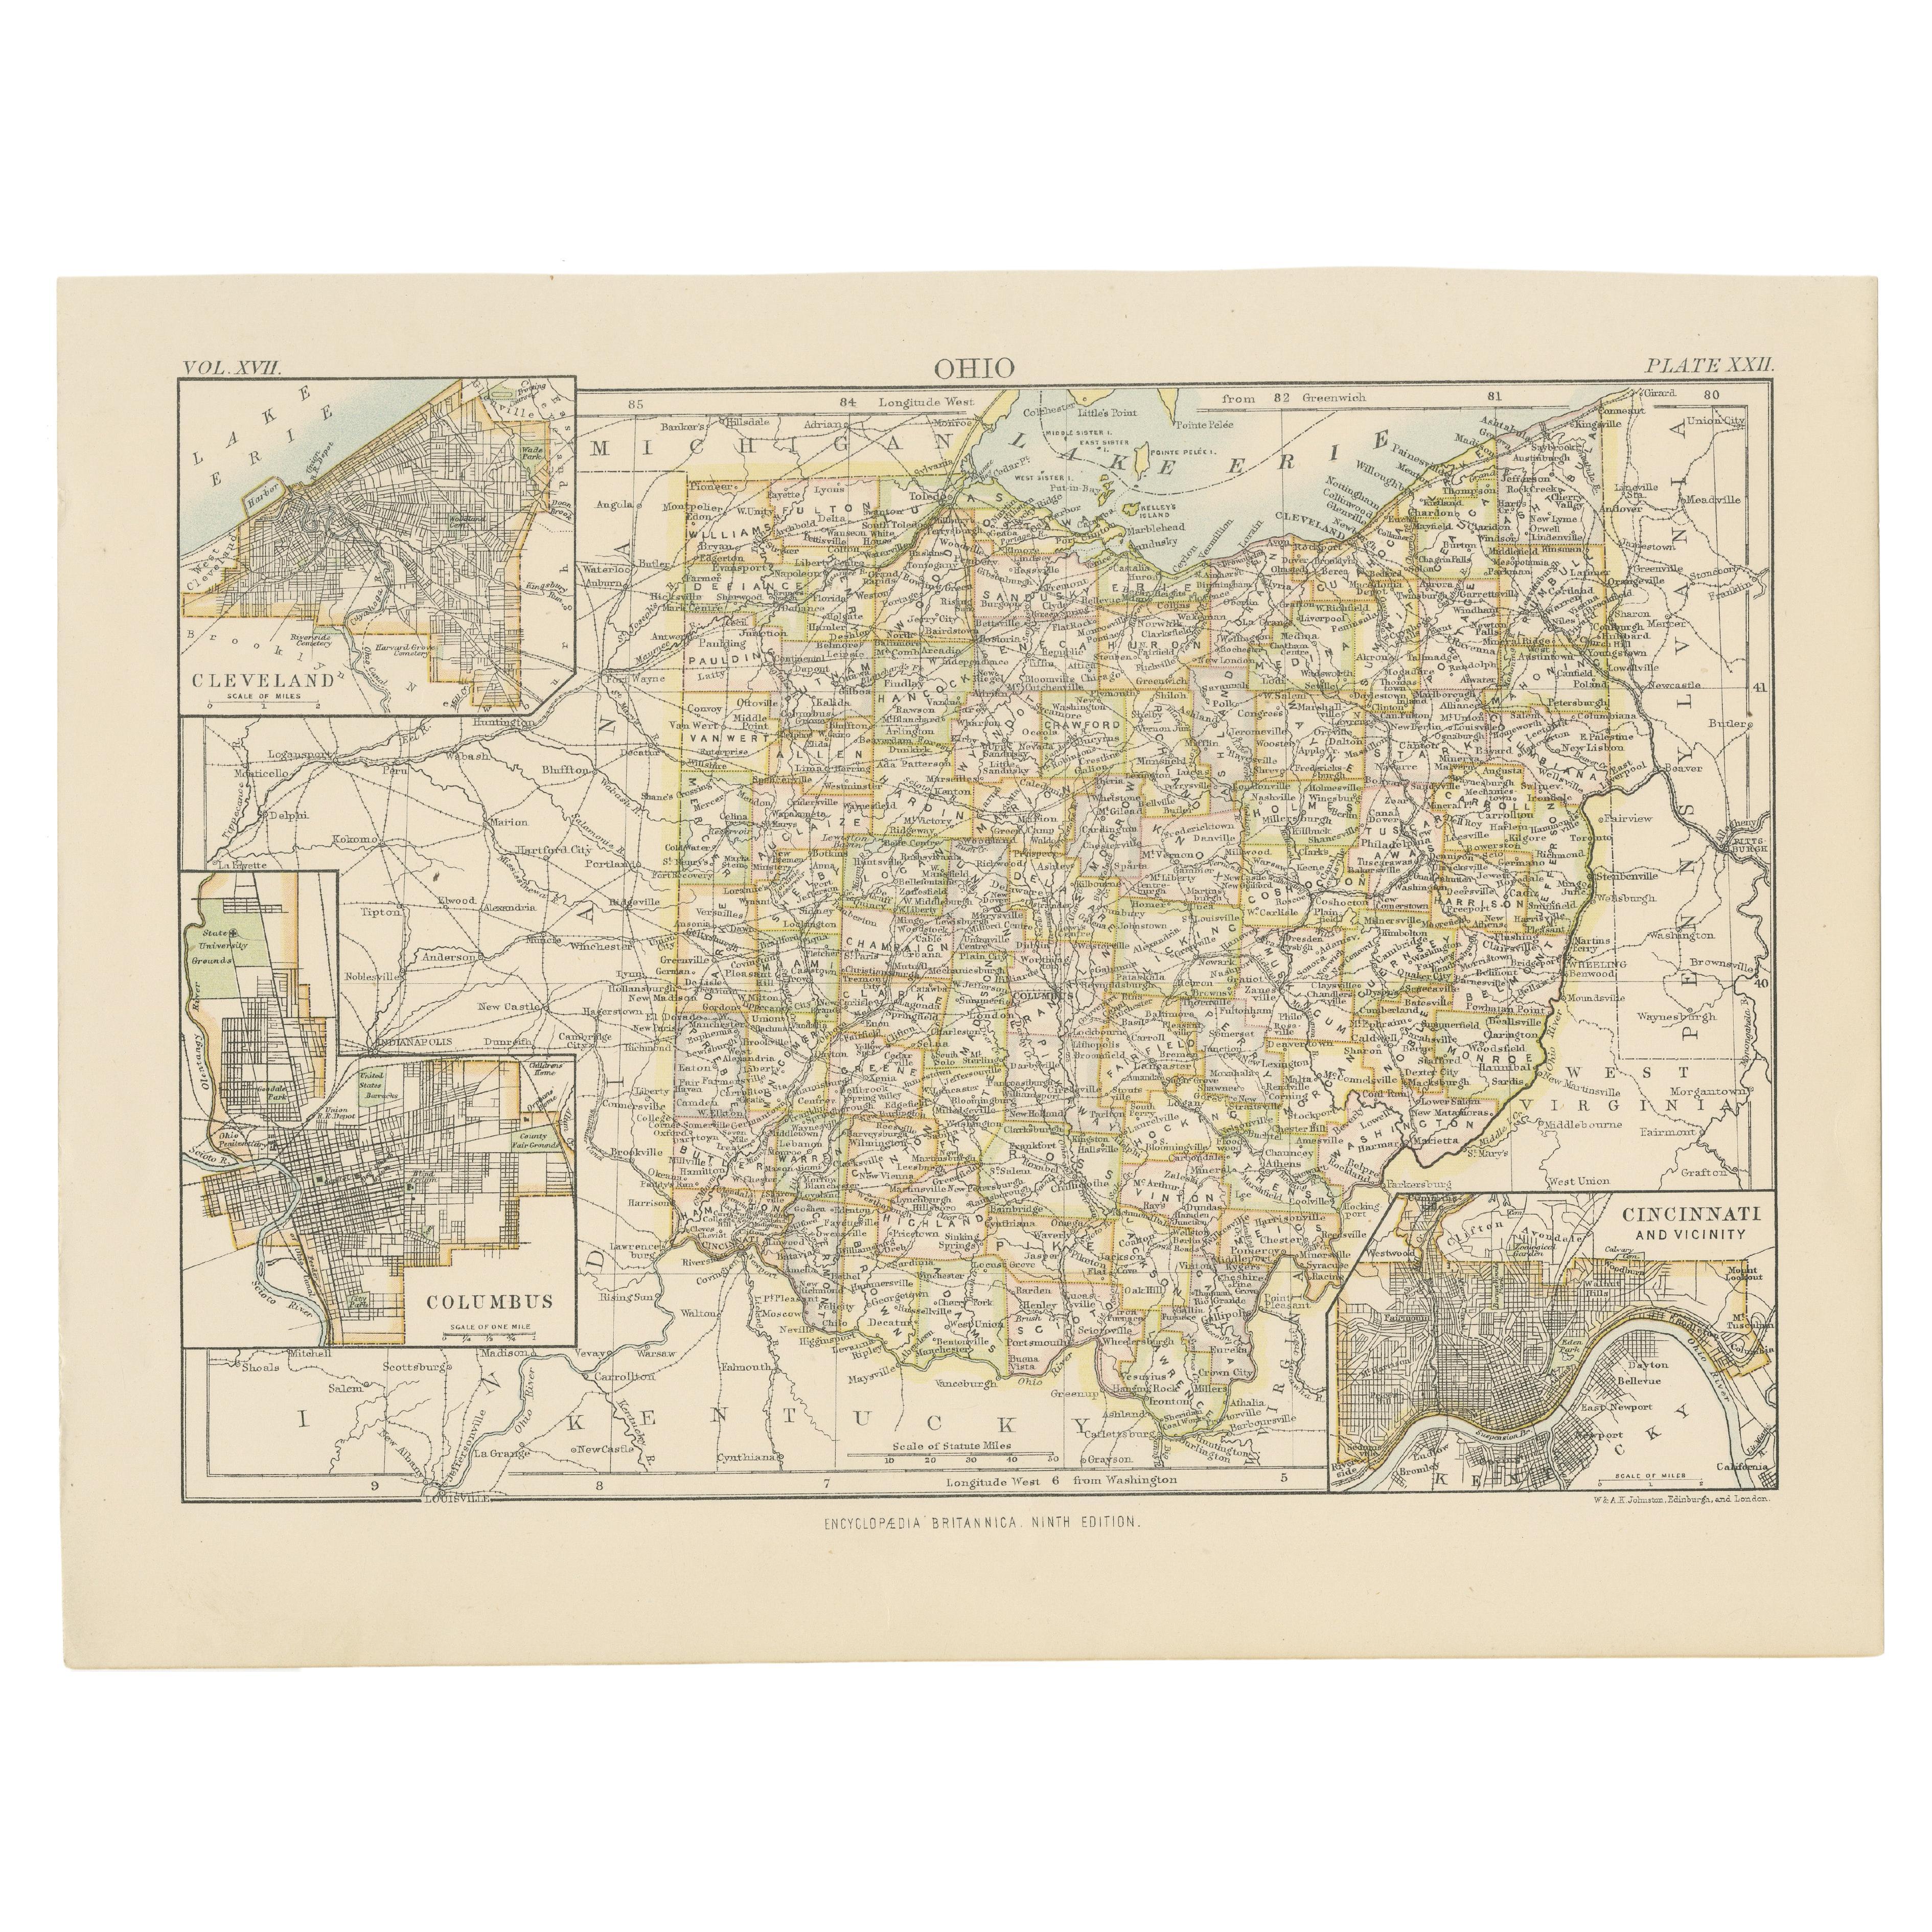 Antique Map of Ohio, with Inset Maps of Cleveland, Columbus and Cincinnati